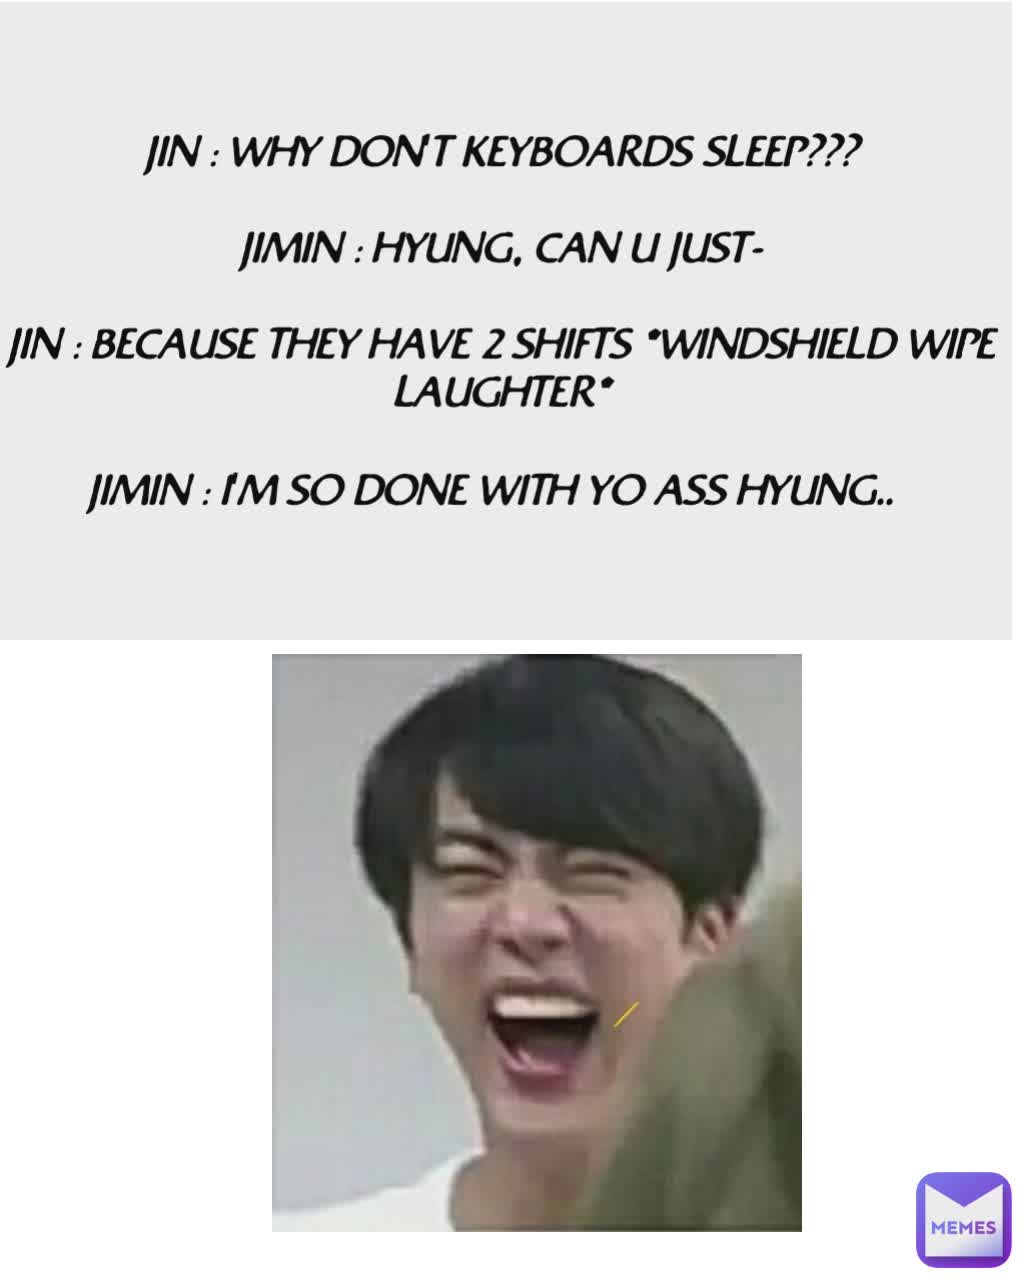 JIN : WHY DON'T KEYBOARDS SLEEP???

JIMIN : HYUNG, CAN U JUST-

JIN : BECAUSE THEY HAVE 2 SHIFTS *WINDSHIELD WIPE LAUGHTER*

JIMIN : I'M SO DONE WITH YO ASS HYUNG..